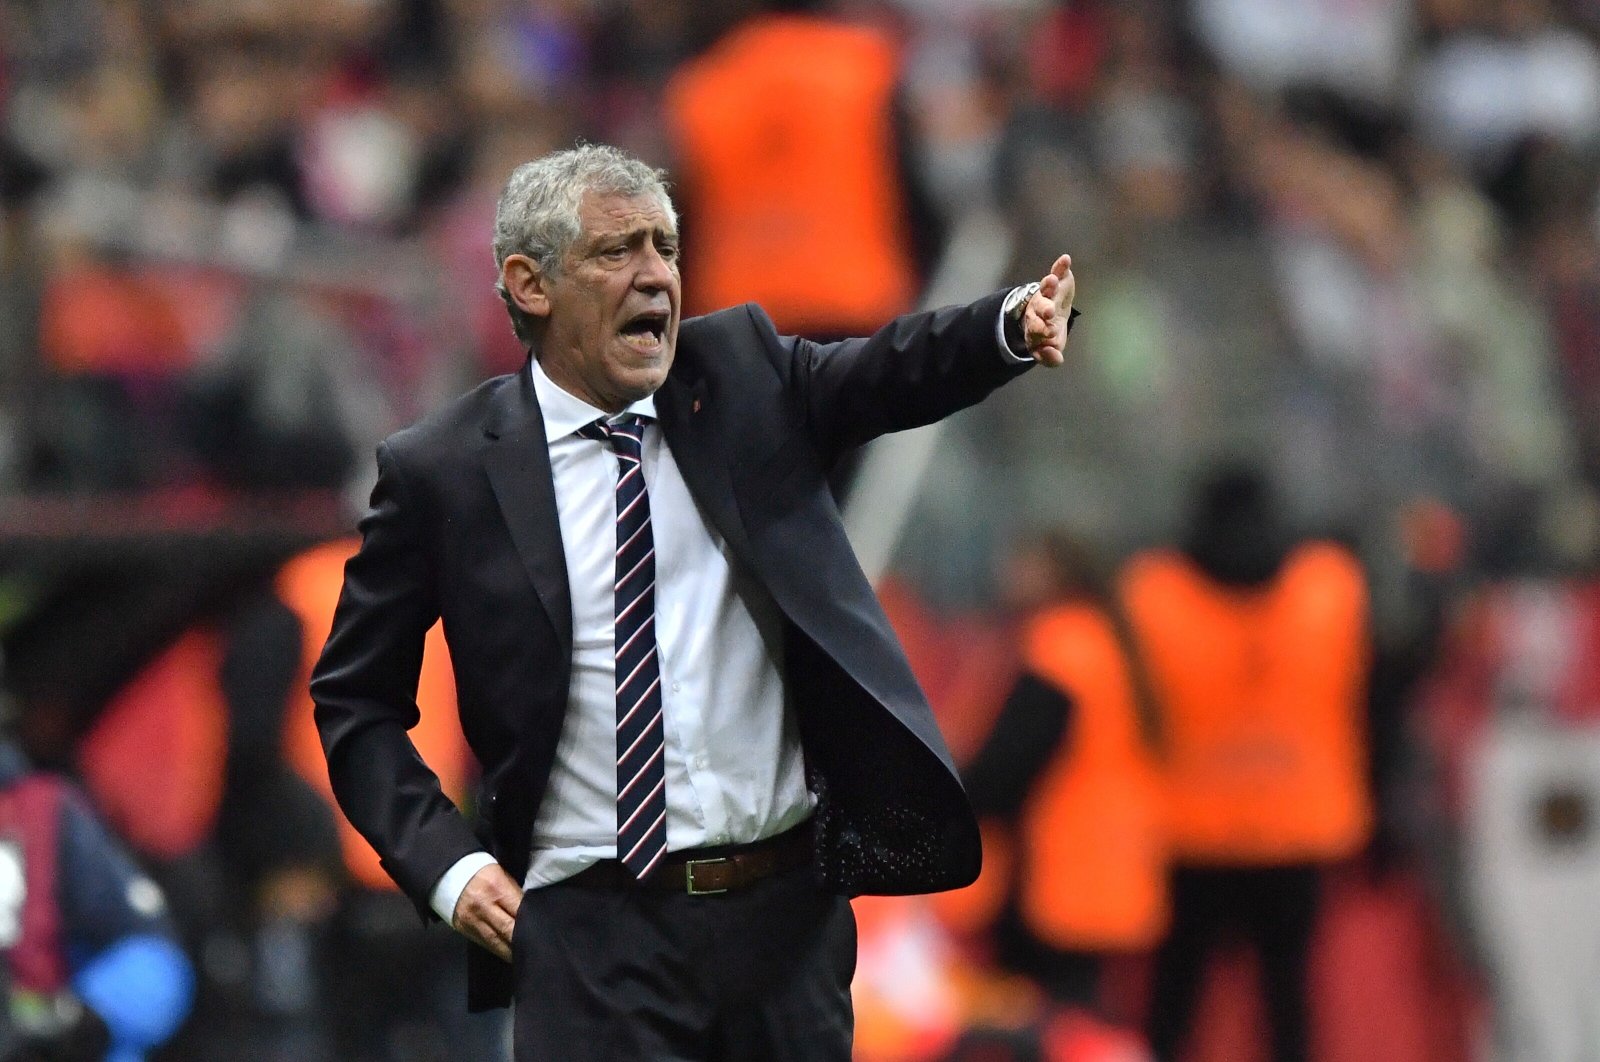 Fernando Santos reacts during the UEFA Euro 2024 qualifying match between Poland and Albania, Warsaw, Poland, March 27, 2023. (EPA Photo)